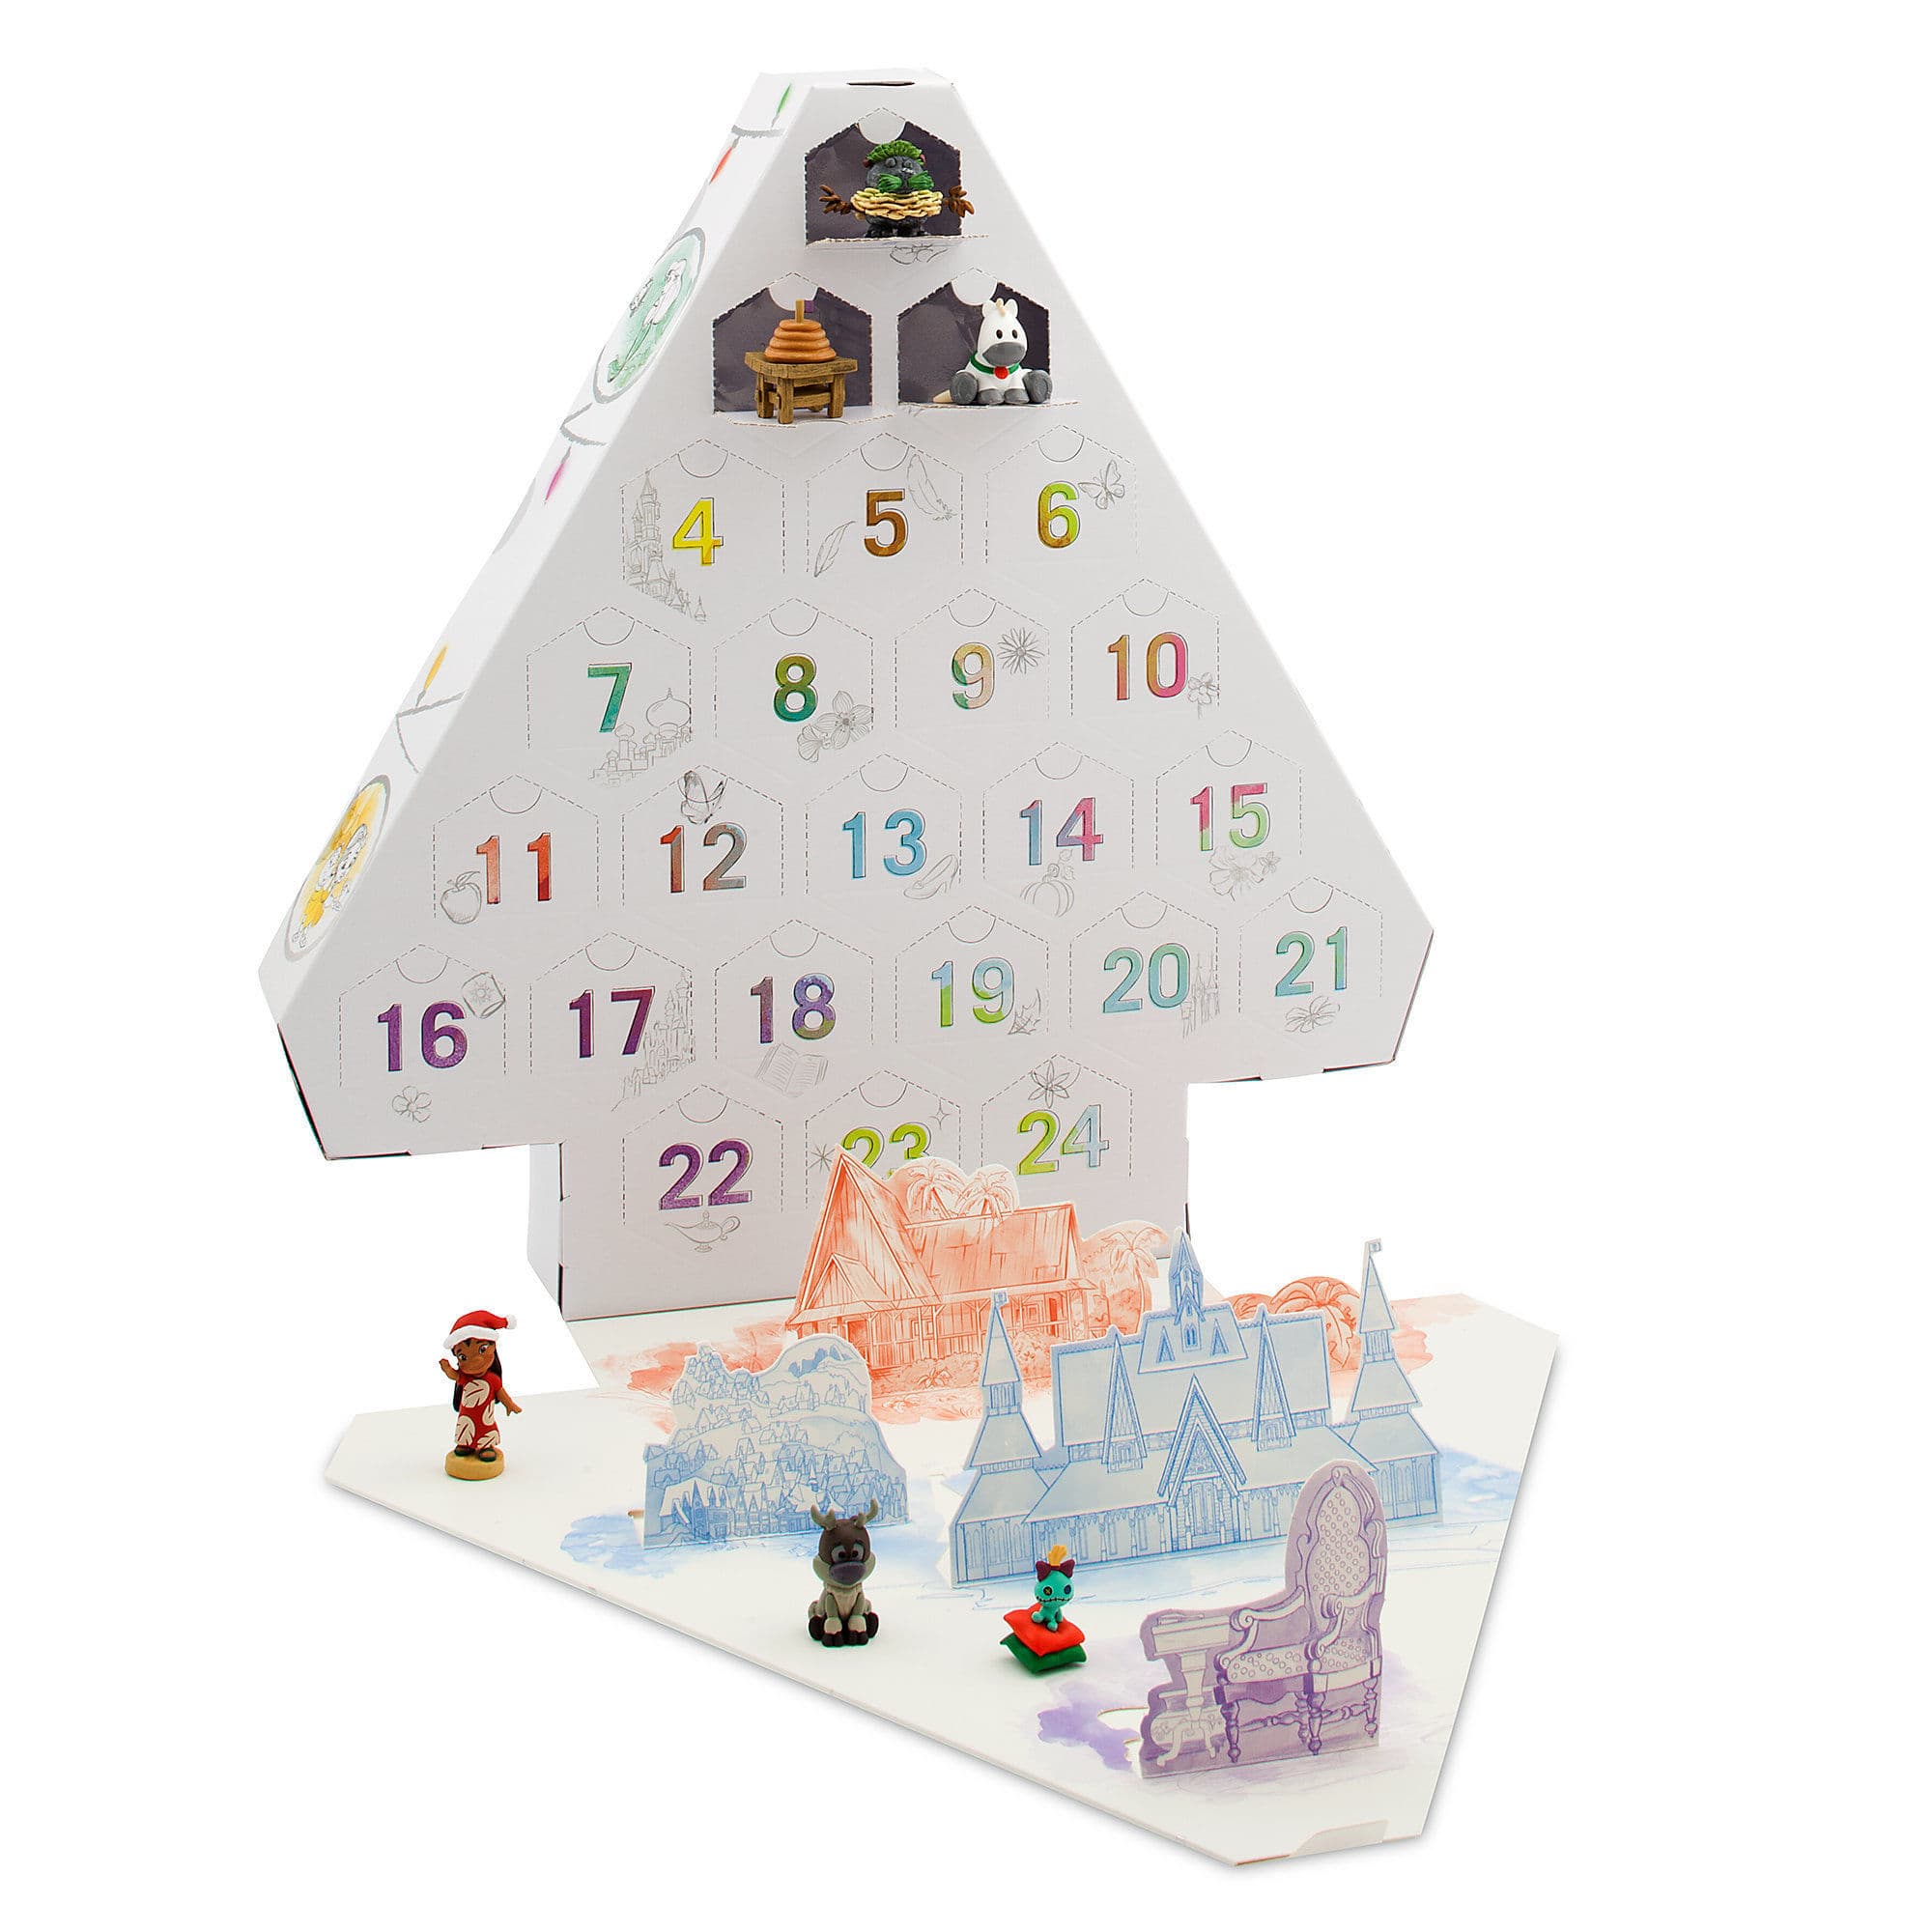 15 advent calendars that guarantee a nerdy countdown to Christmas